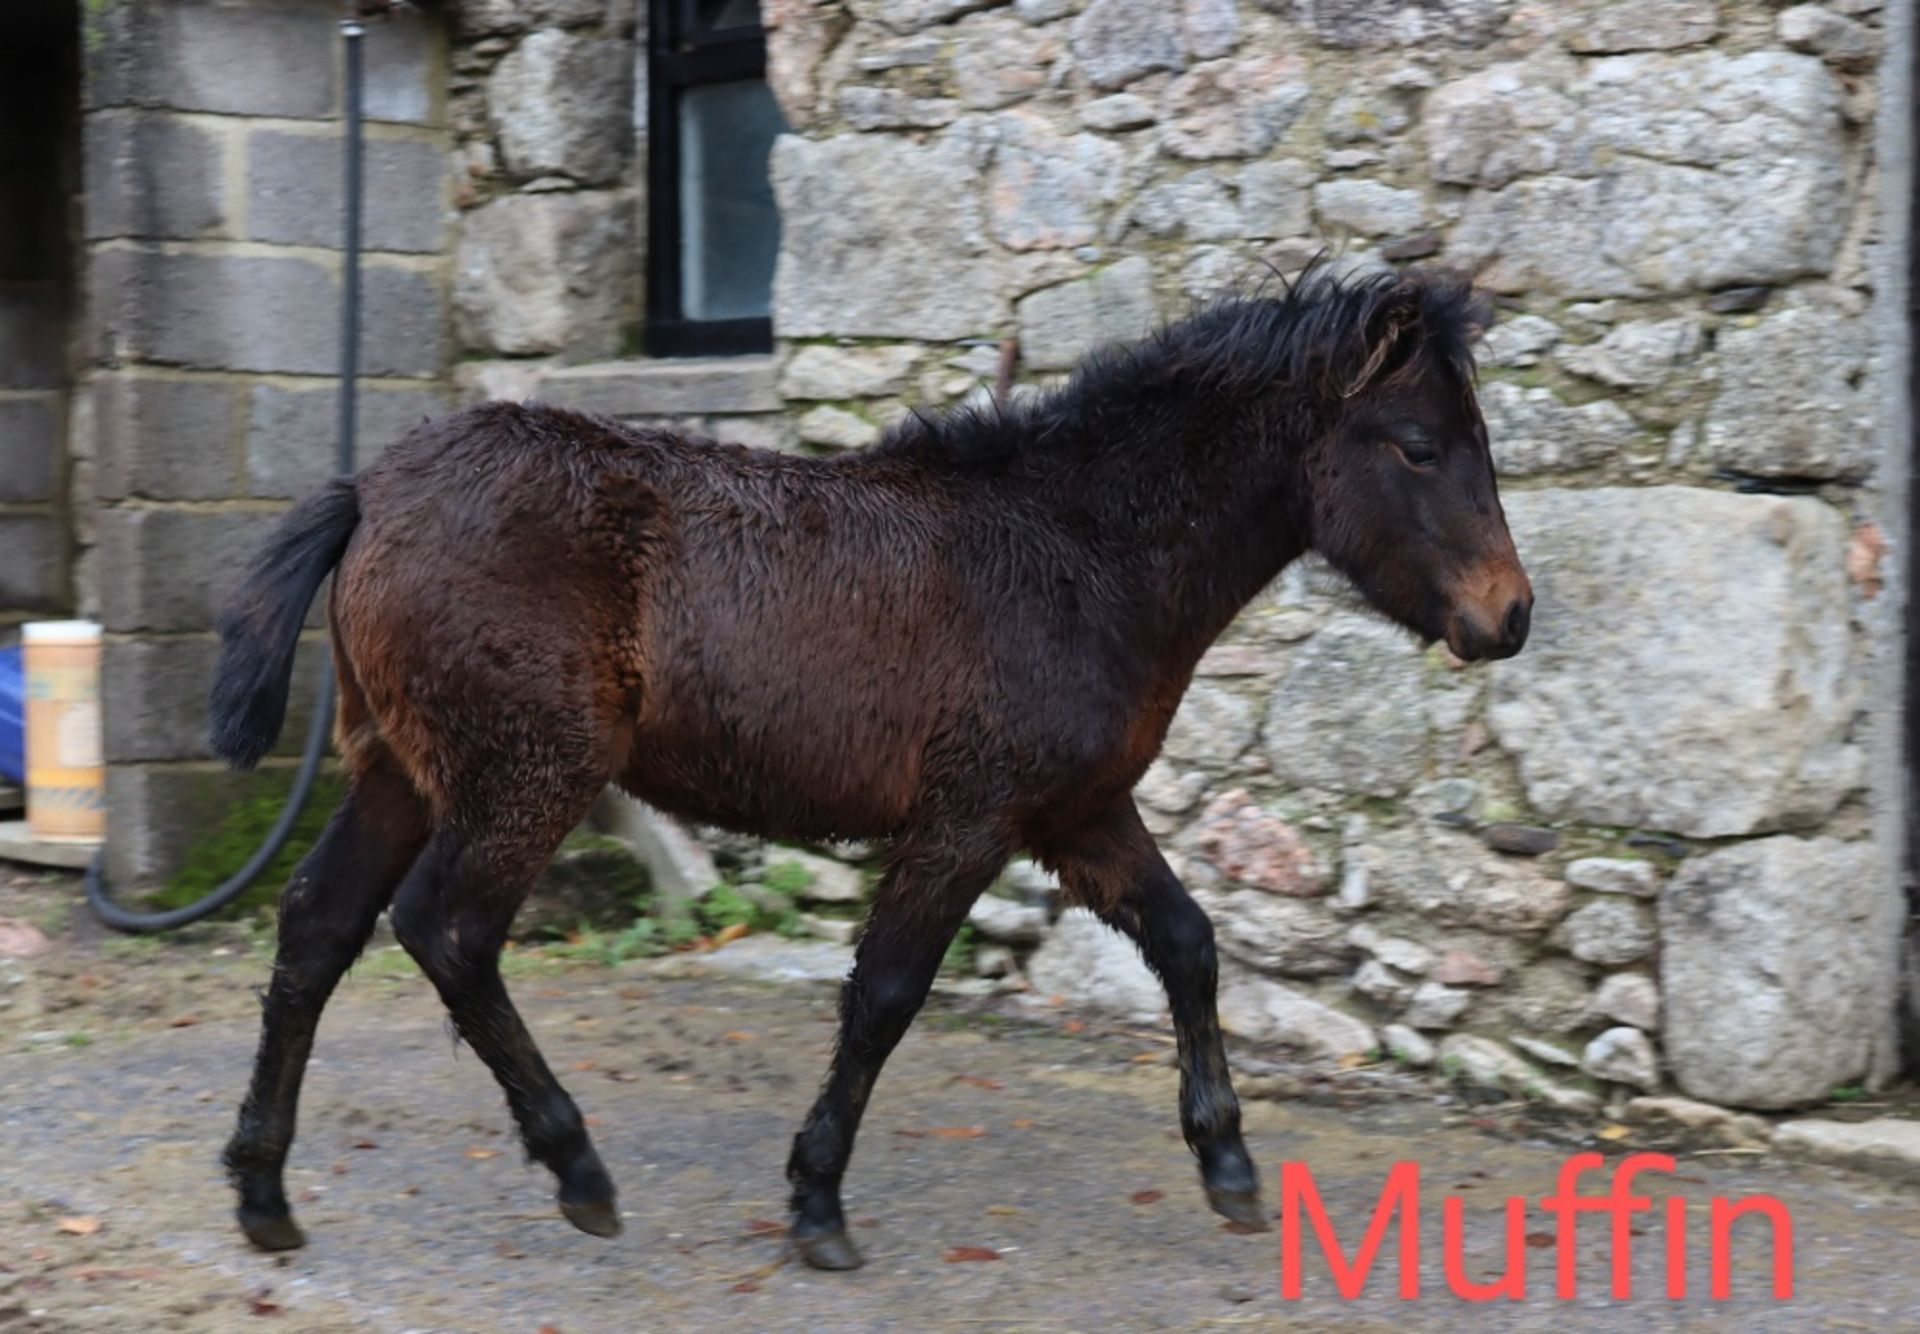 'BLACKATOR MUFFIN' DARTMOOR HILL PONY BAY FILLY FOAL - Image 3 of 21